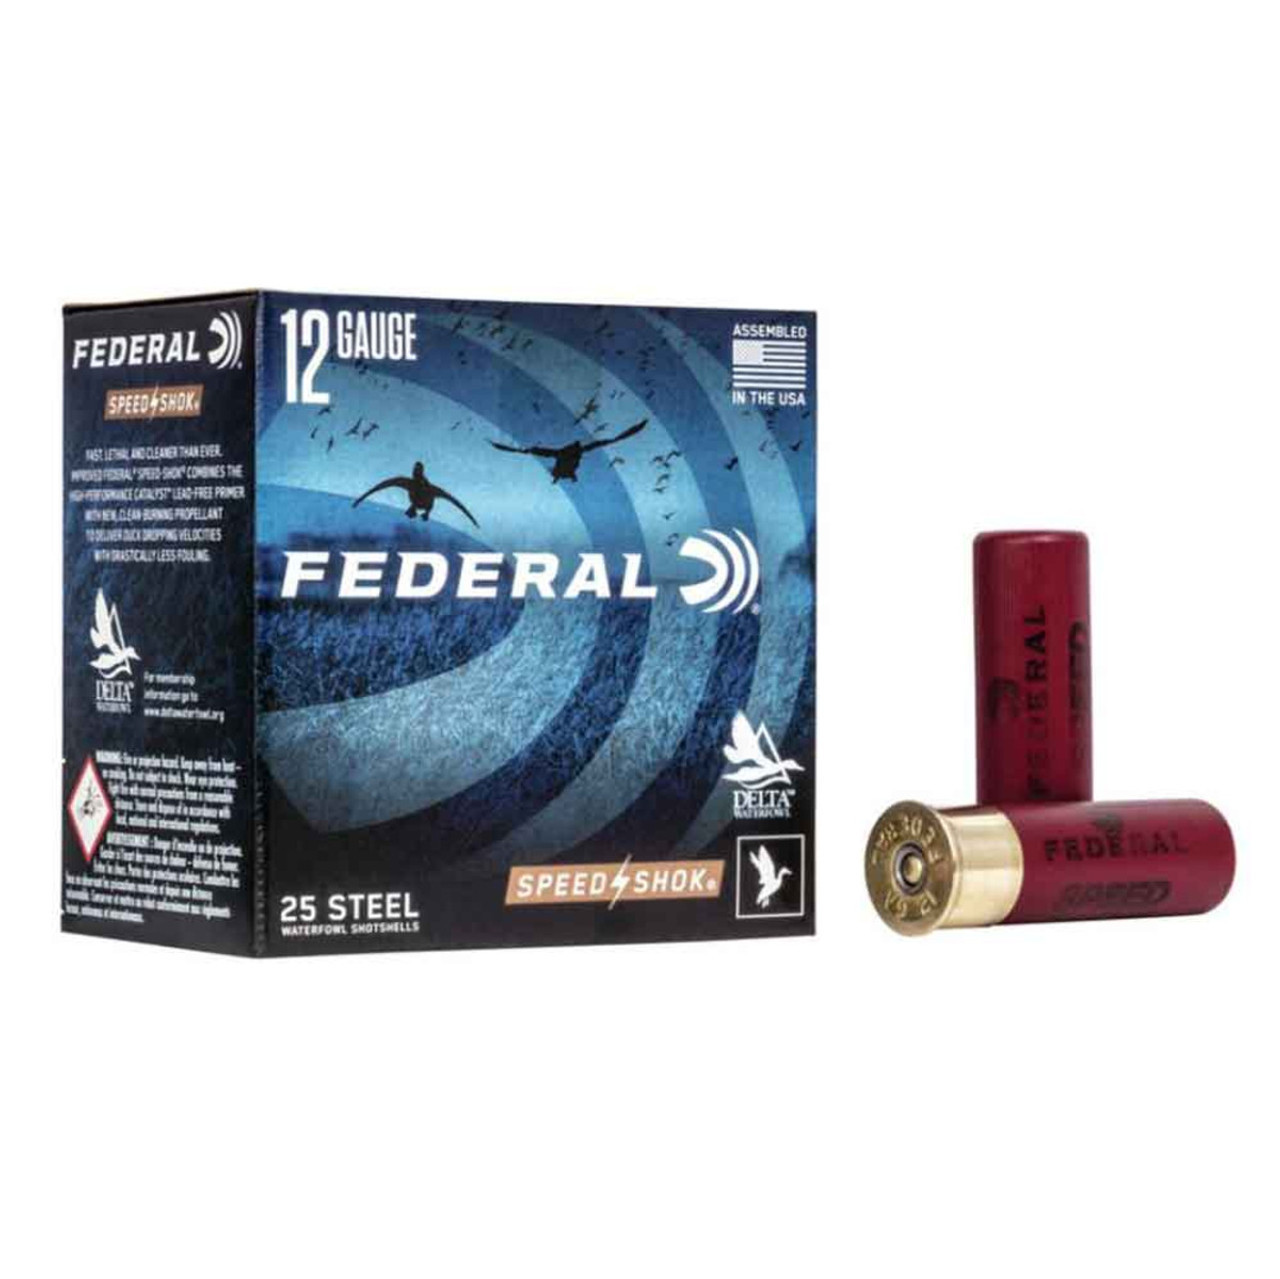 FEDERAL CARTRIDGE CO Waterfowl
Federal WF1334 Speed-Shok Waterfowl 12 ga 3.5 in 1.4 oz 4 Shot 

Built for performance at a value price and featuring uniformly round pellets for tighter shot patterns. Speed-Shok also features high-a density plastic wad with a gas-sealing flange for efficiency. Plus, their high output primers ensure consistent ballistics and solid dependability even in cold and wet conditions.

SPECIFICATIONS:
Mfg Item Num: WF1334
Category: SHOTSHELL STEEL LOADS
Gauge :12 Gauge
Type :Steel
Length :3.5 in
Ounces :1-3/8 oz
Shot Size :4
Muzzle Velocity :1550 fps
Rounds Per Box :25 Rounds Per Box
Application :Hunting